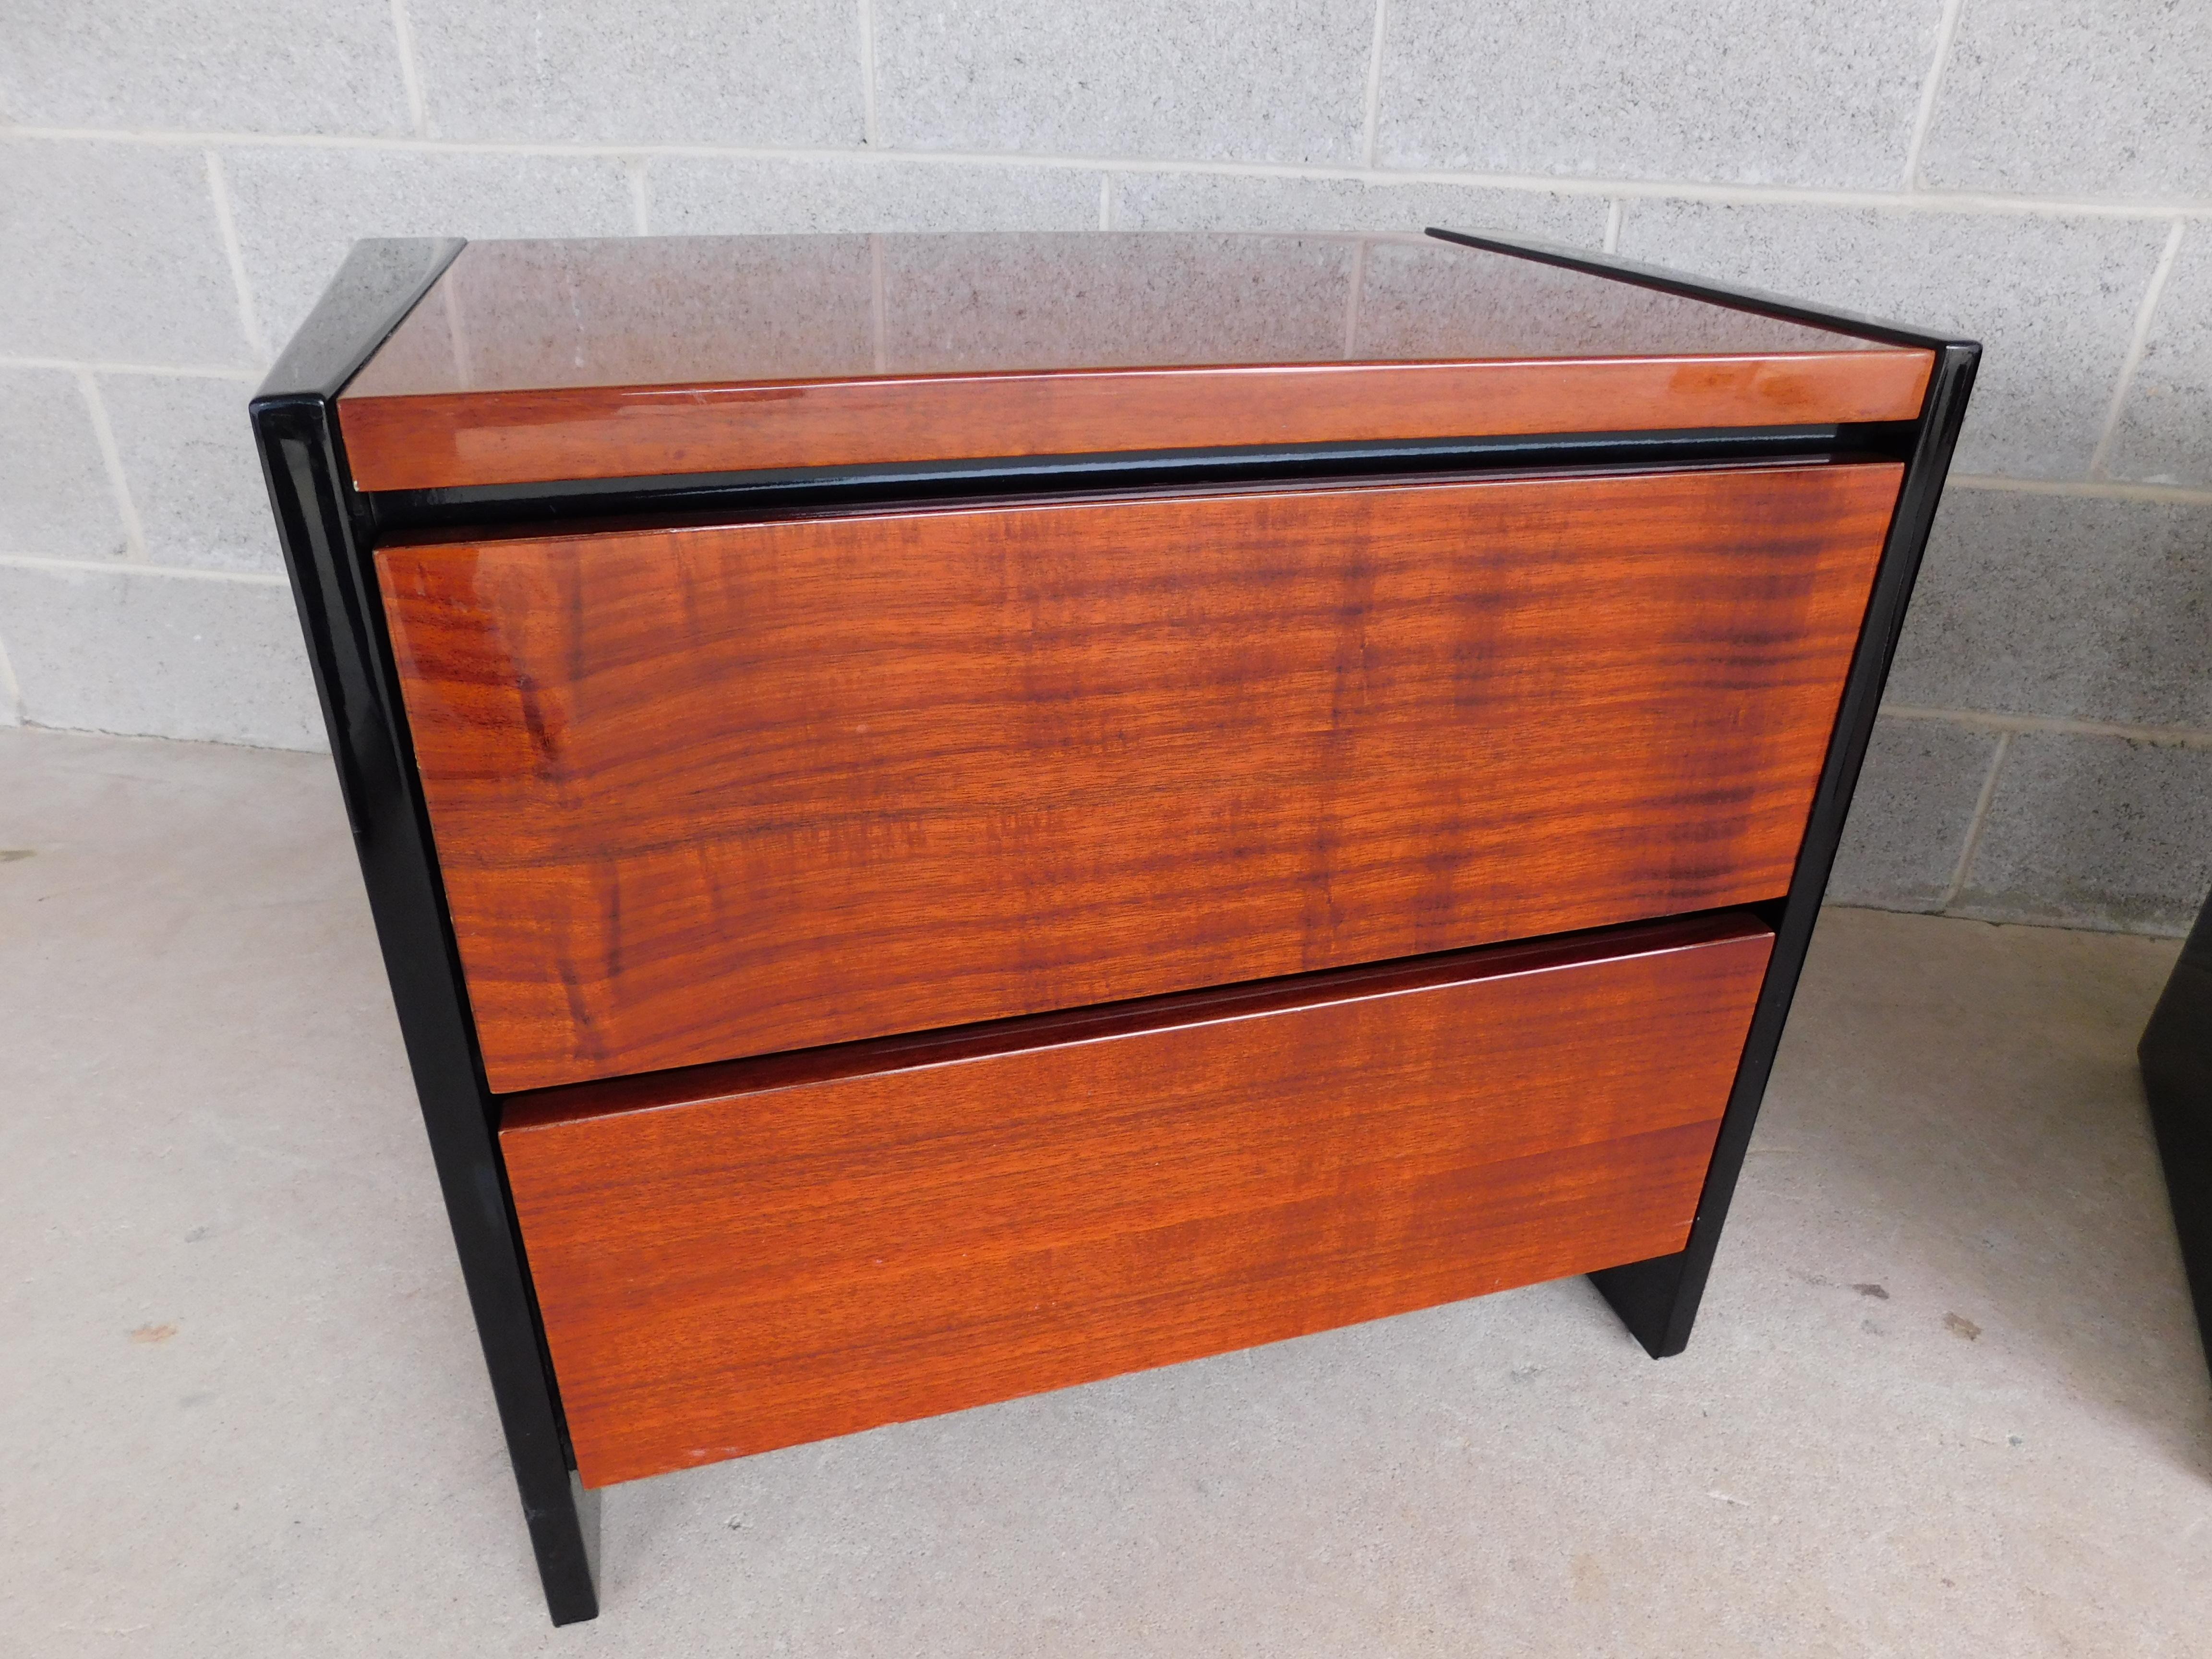 Original condition black lacquer wedged taper design sides, with exotic figured wood top and drawer faces, 2 drawer per bedside table,

Present themselves in good condition, some top surface fine scratch marks show on one stand in the correct